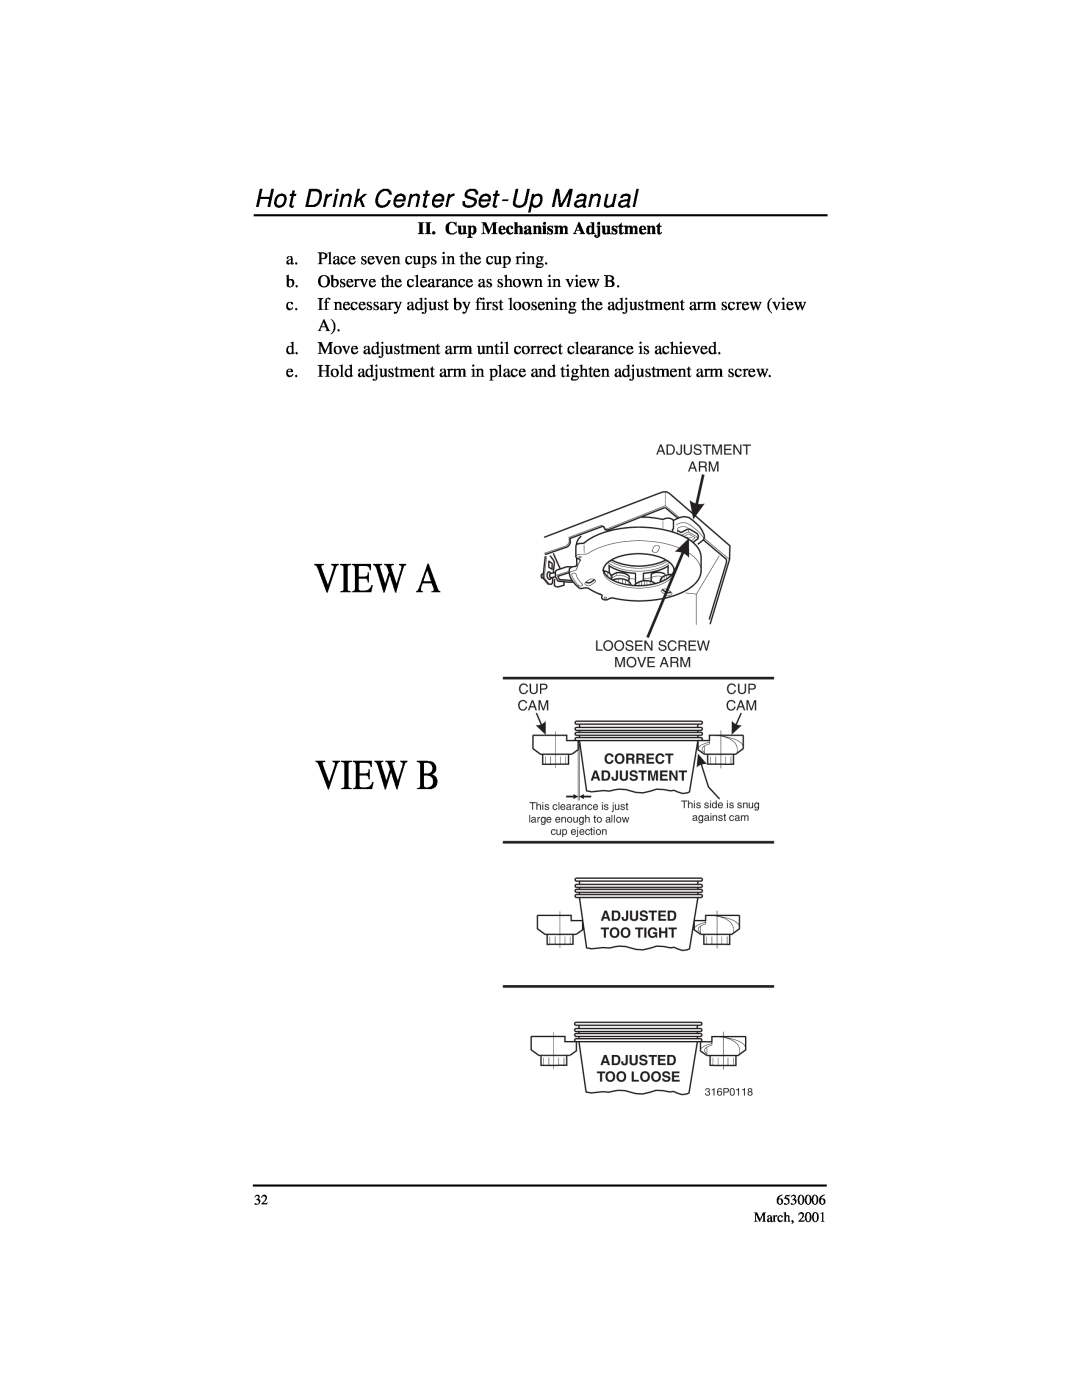 Crane Merchandising Systems 6530006 manual View A, View B, Hot Drink Center Set-Up Manual, II. Cup Mechanism Adjustment 